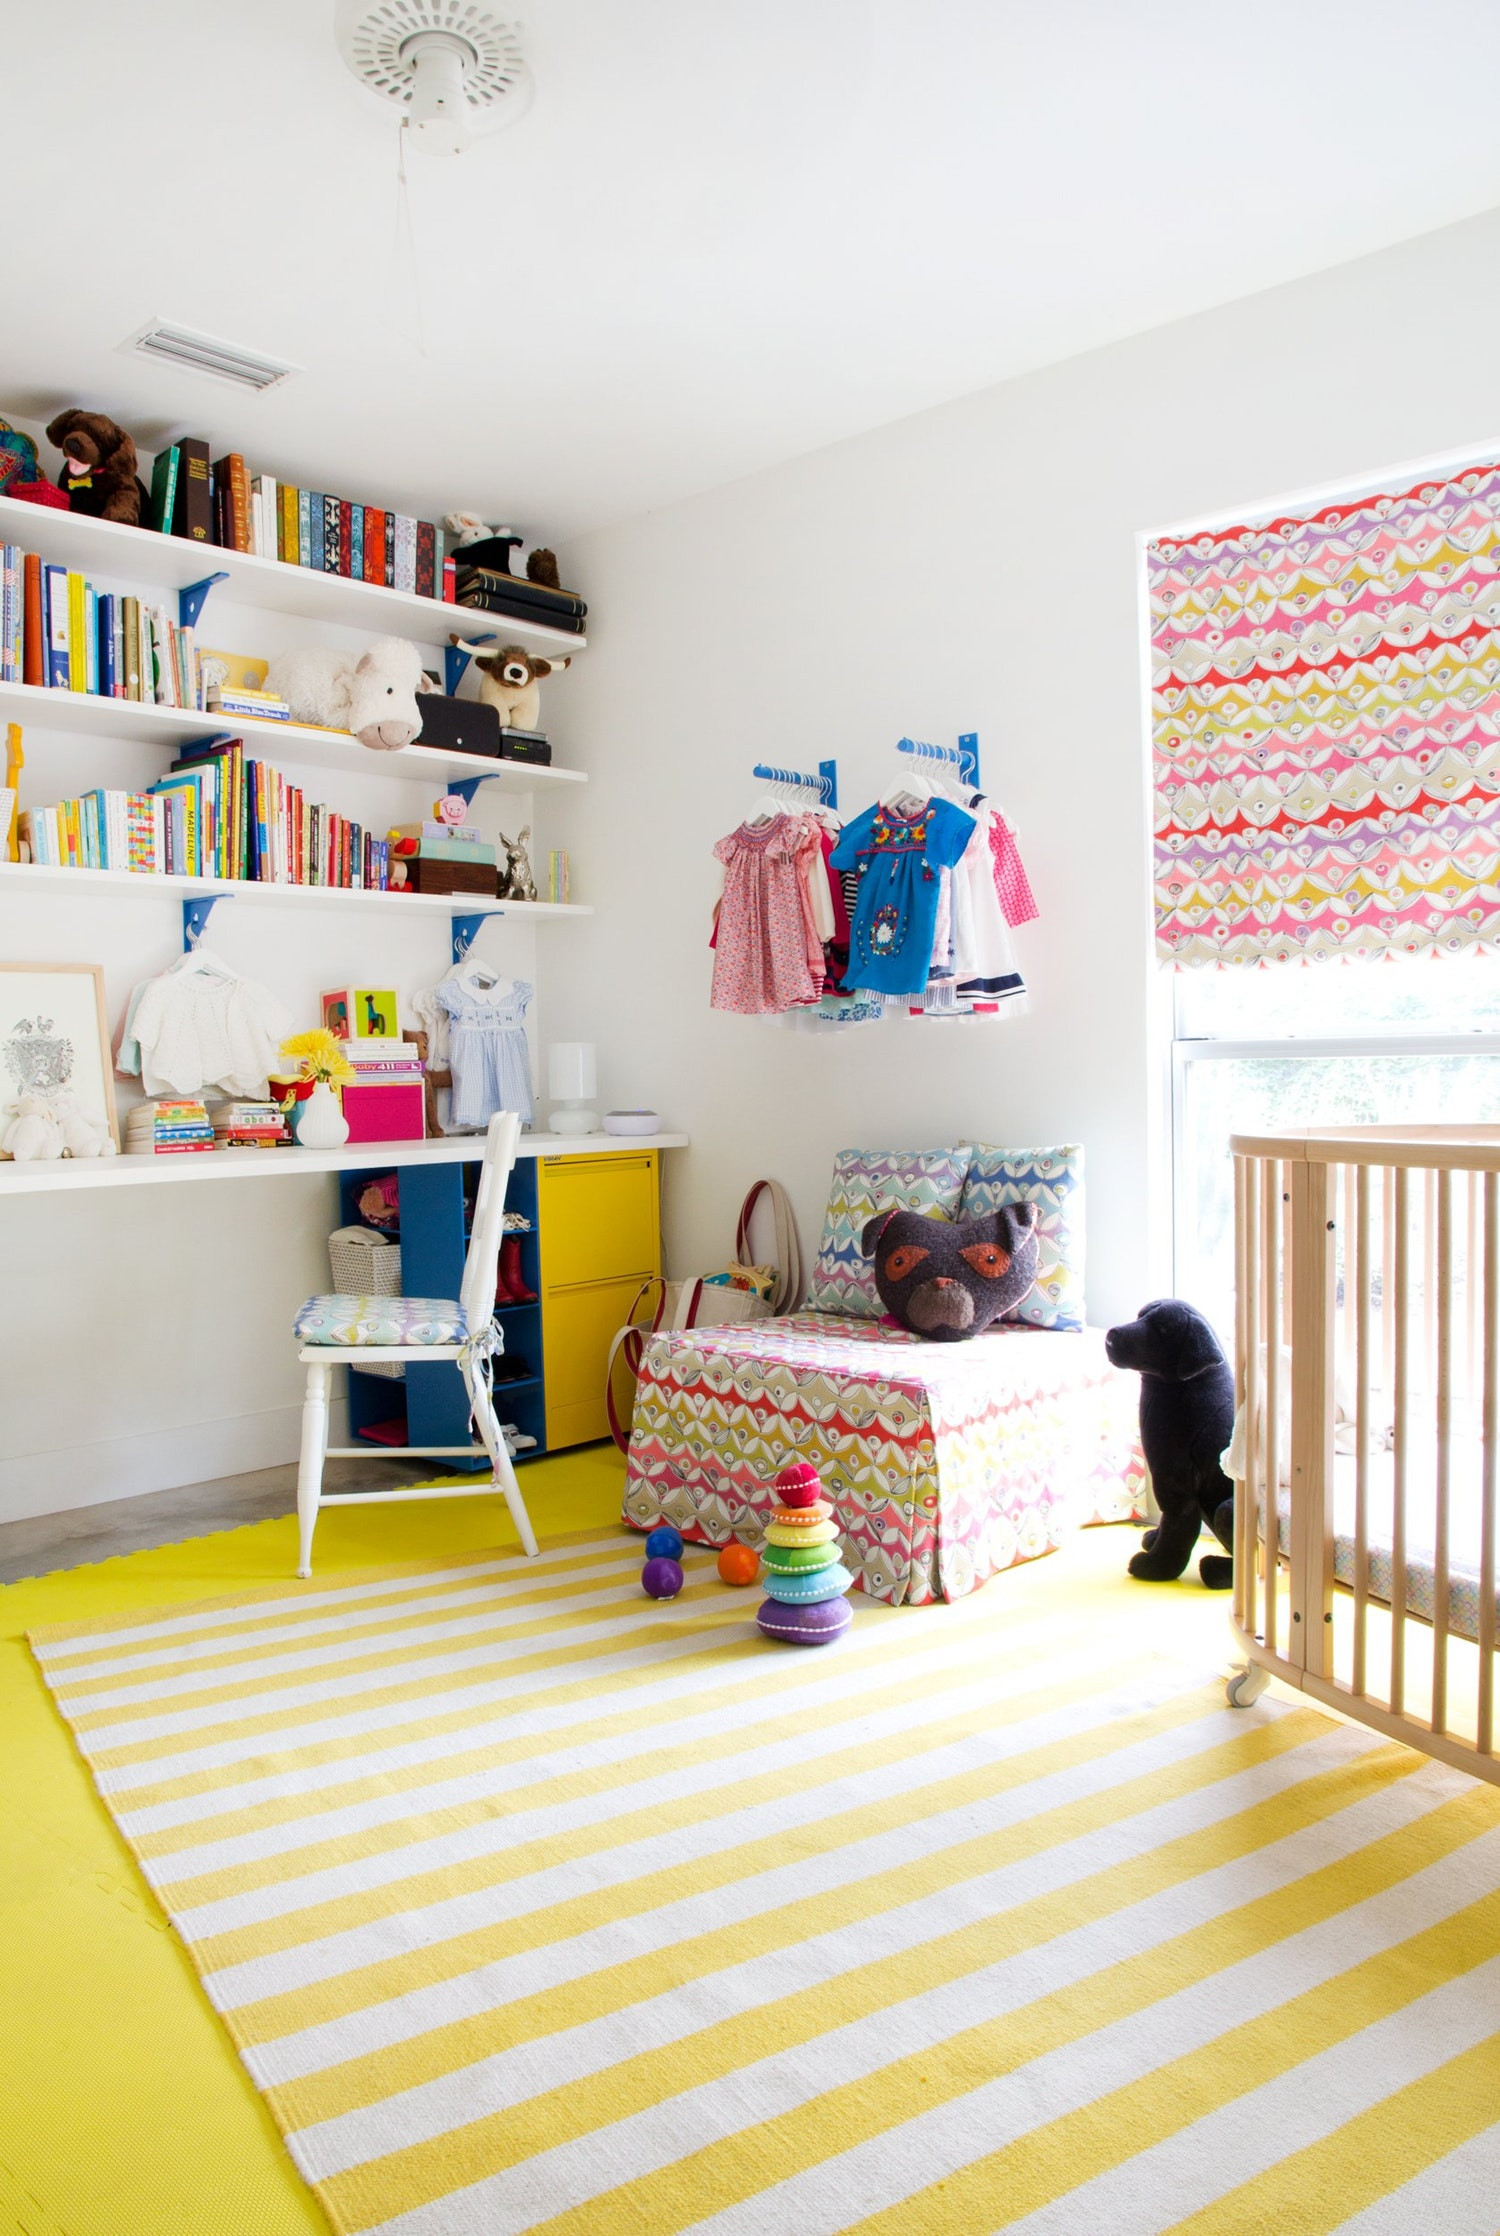 Storage For Kids Room
 30 Smart Storage Ideas for Small Spaces